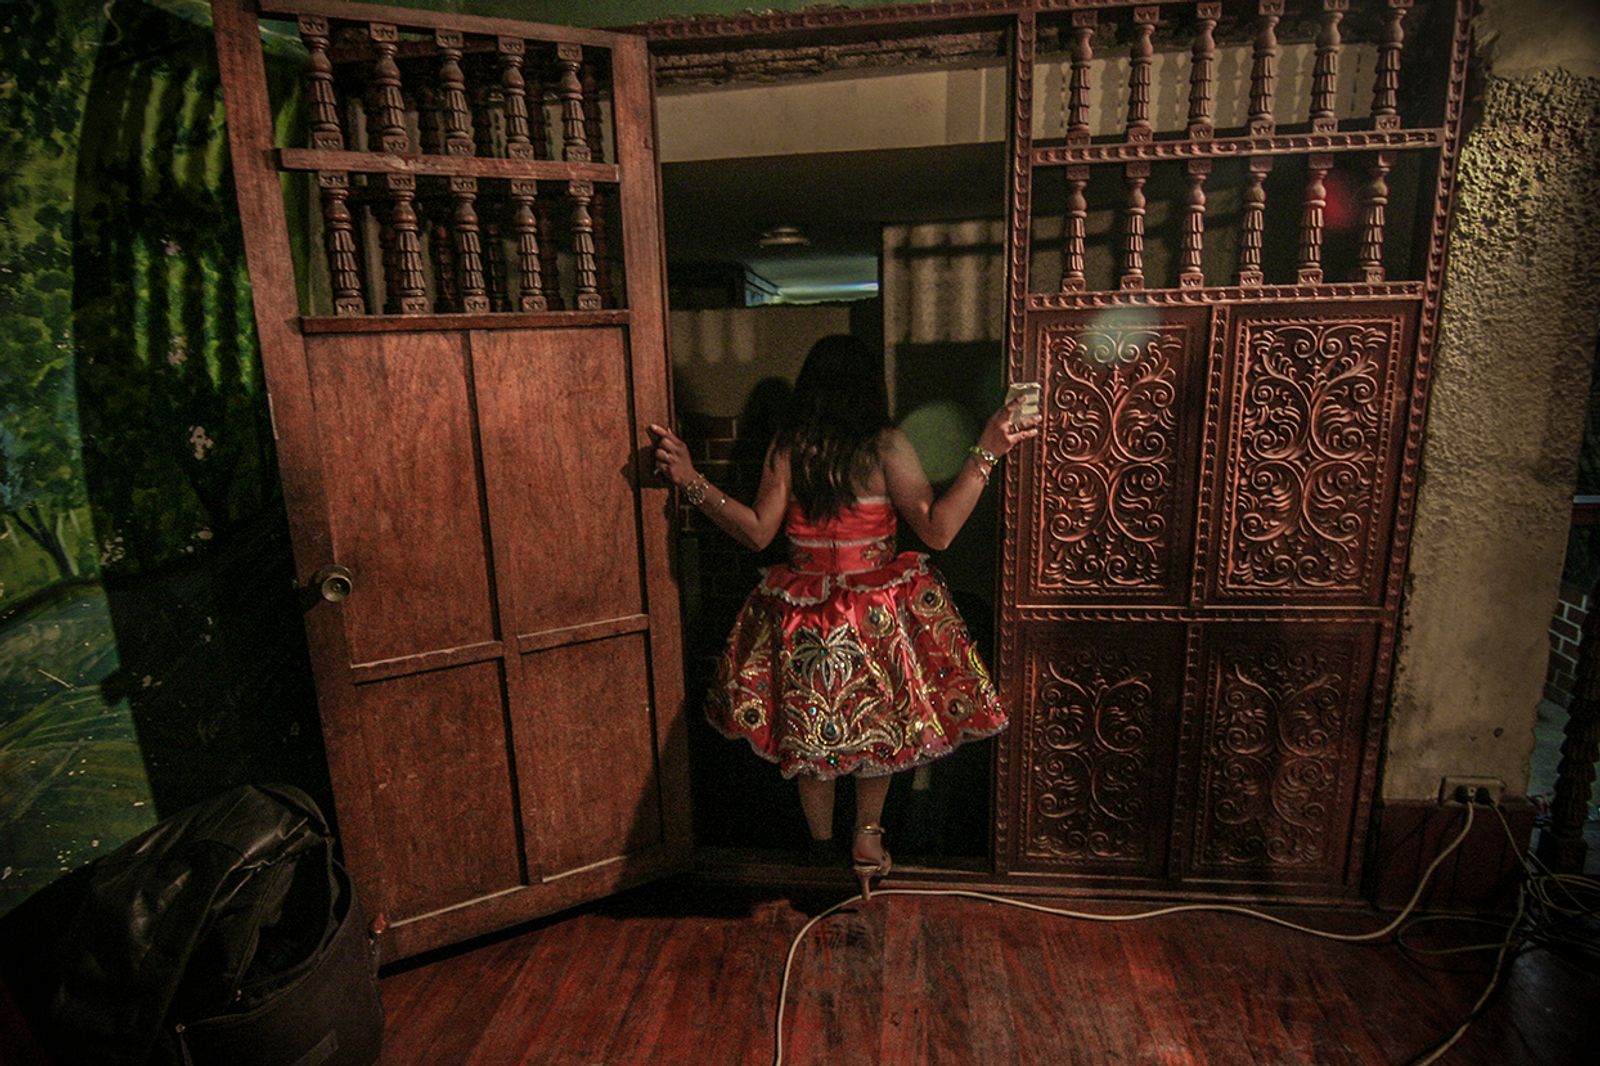 © Max Cabello Orcasitas - Yanet Acuña finishes singing at a concert in a wayno music venue. She had to travel about 35 kilometers to sing.